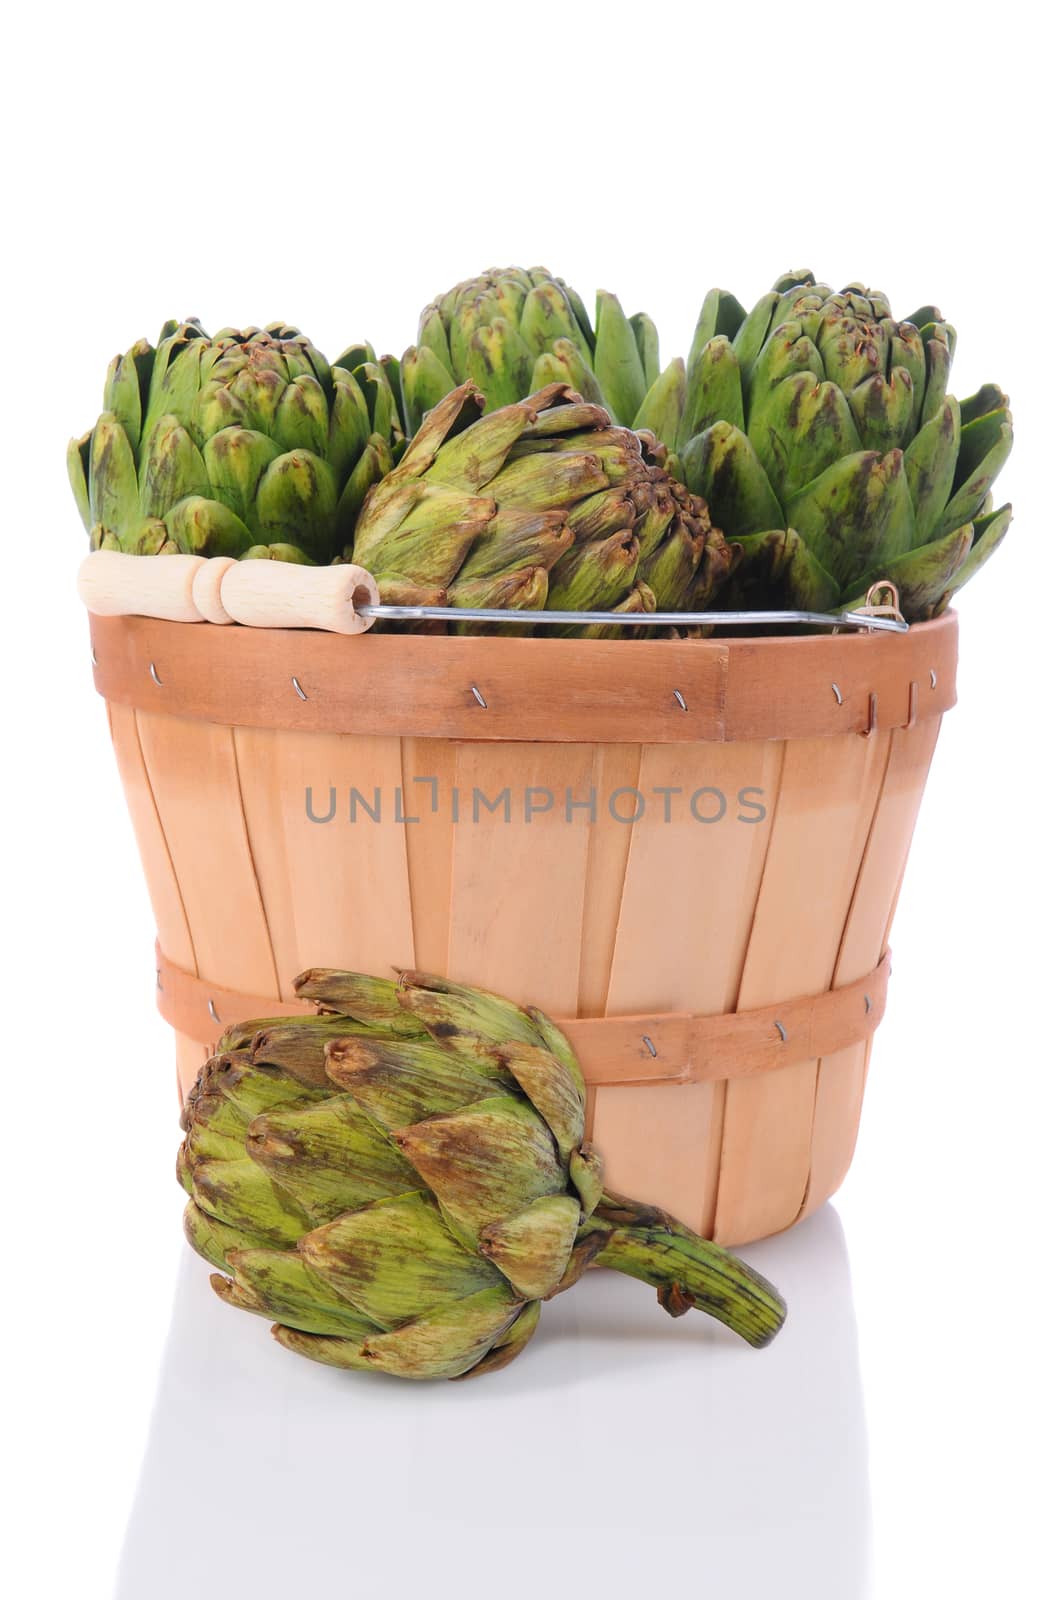 Fresh picked artichokes in a basket with one on the surface in the foreground. Vertical format over a white background with reflection.